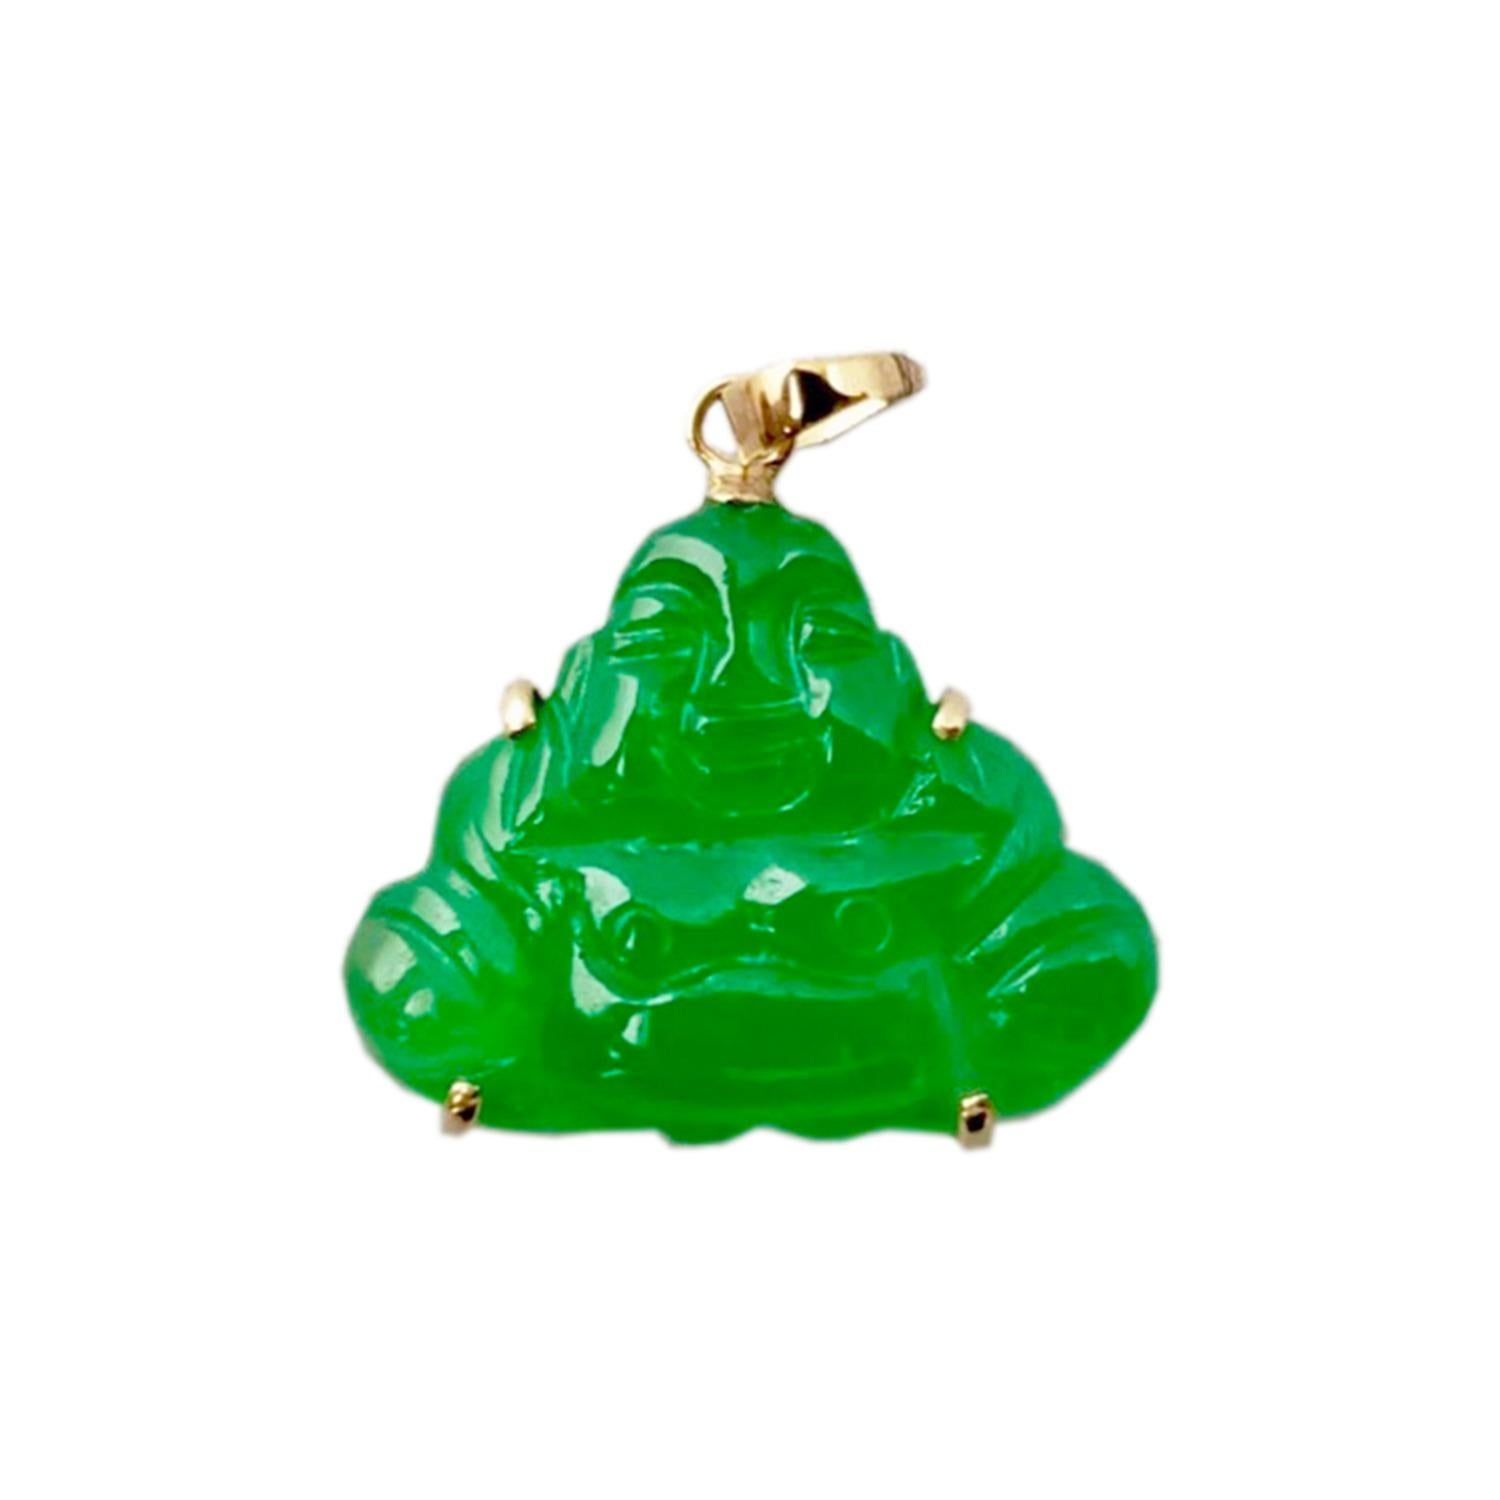 Guangdong Green Jade Buddha Pendant with Solid 18K Yellow Gold For Sale 4